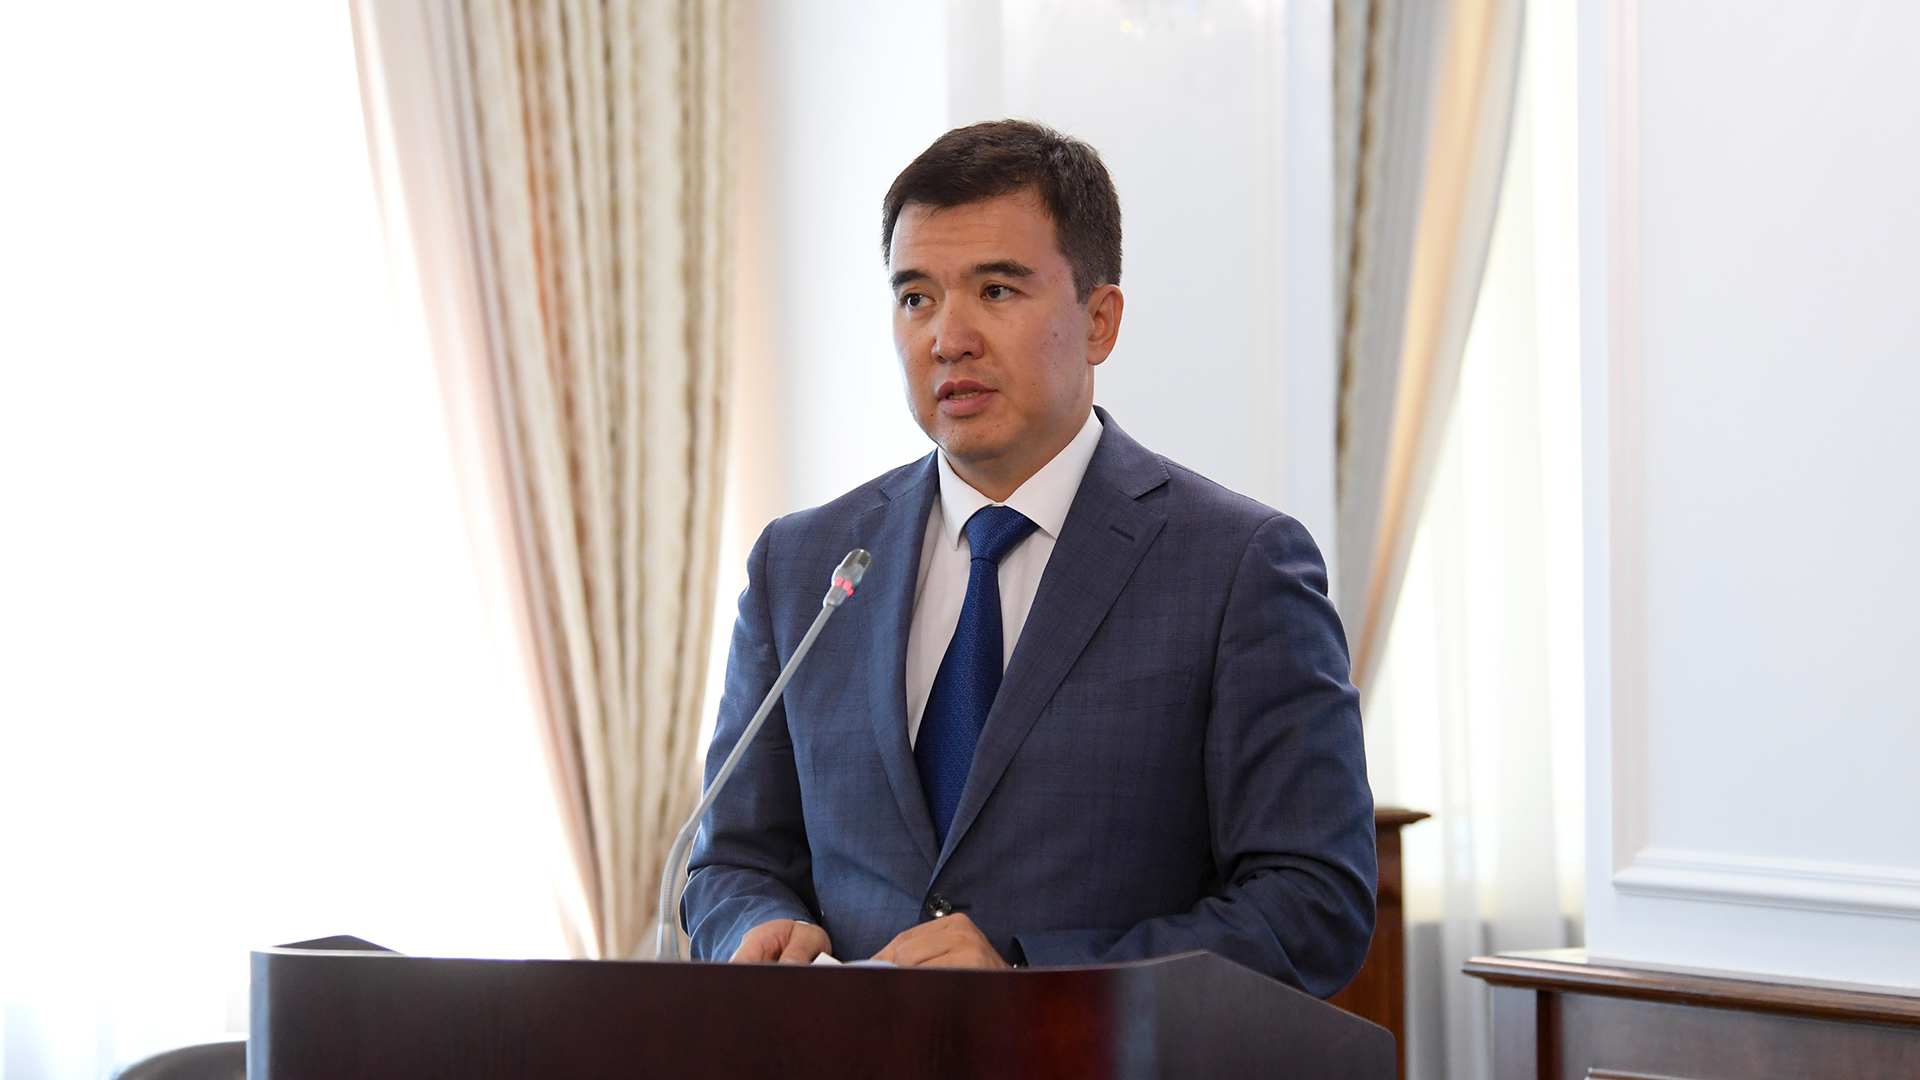 GDP per capita will increase to $14.3 thousand in Kazakhstan